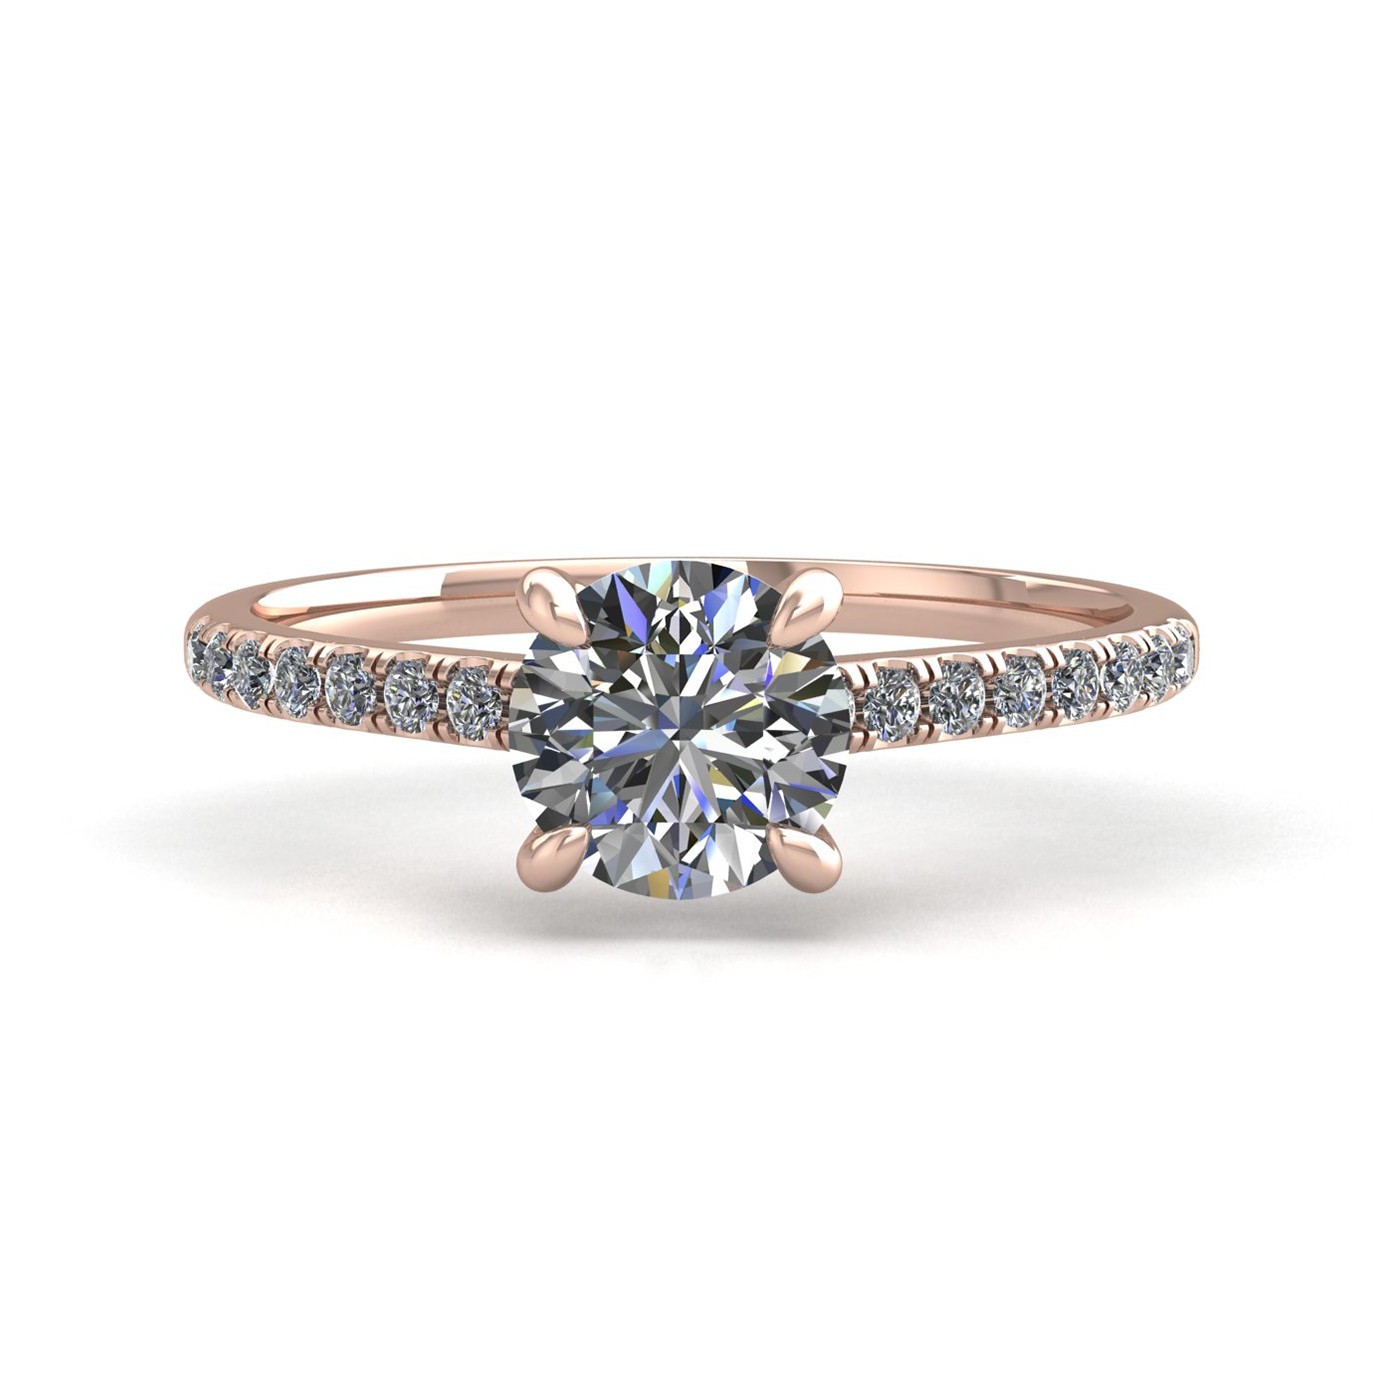 18k rose gold 2.5ct 4 prongs round cut diamond engagement ring with whisper thin pavÉ set band Photos & images